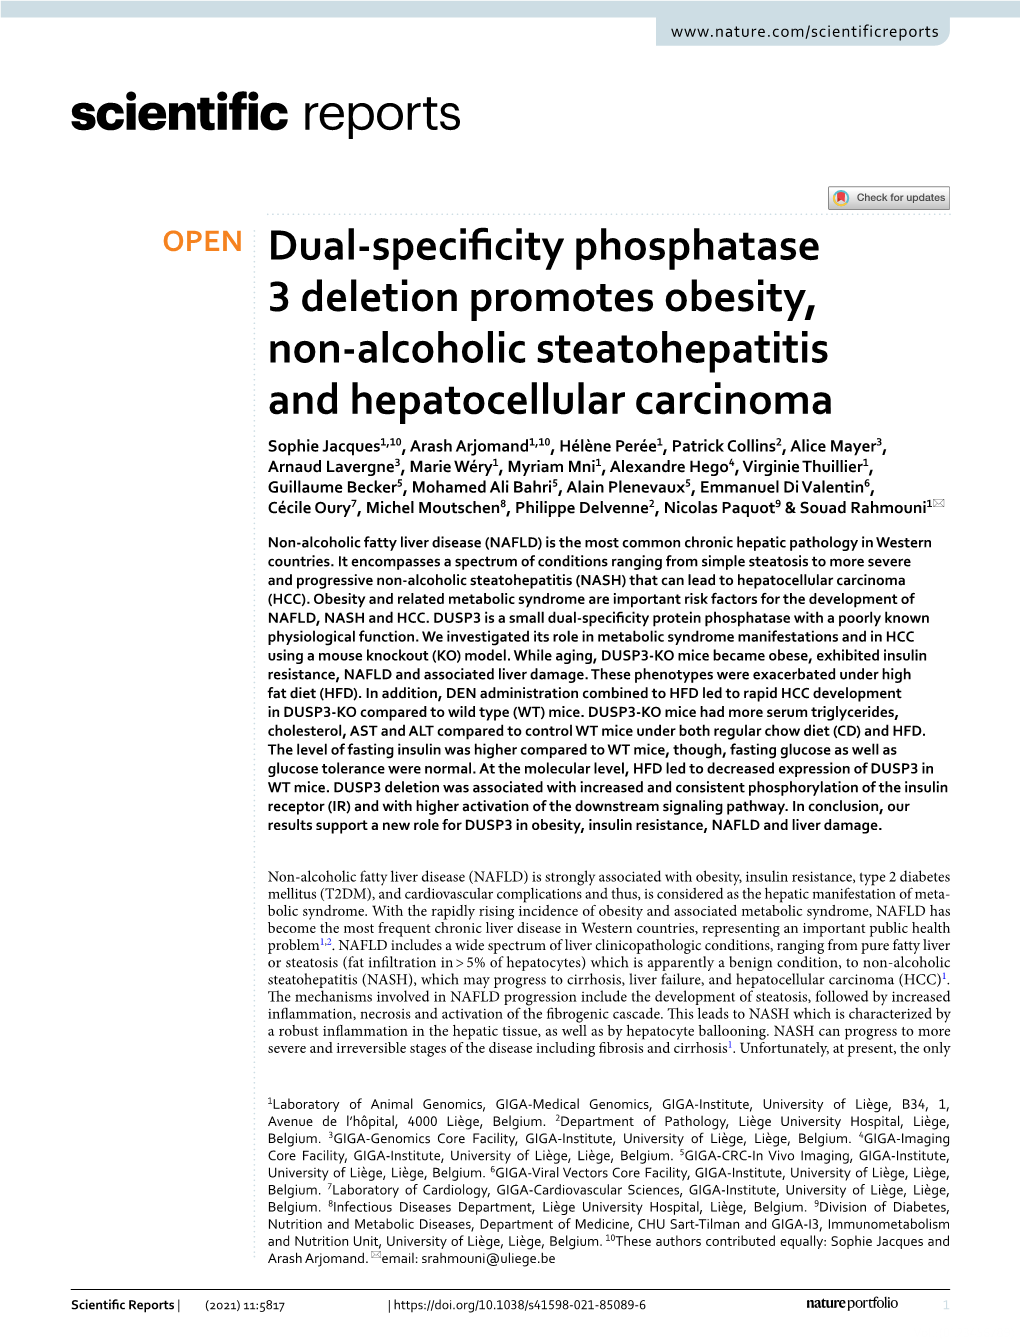 Dual-Specificity Phosphatase 3 Deletion Promotes Obesity, Non